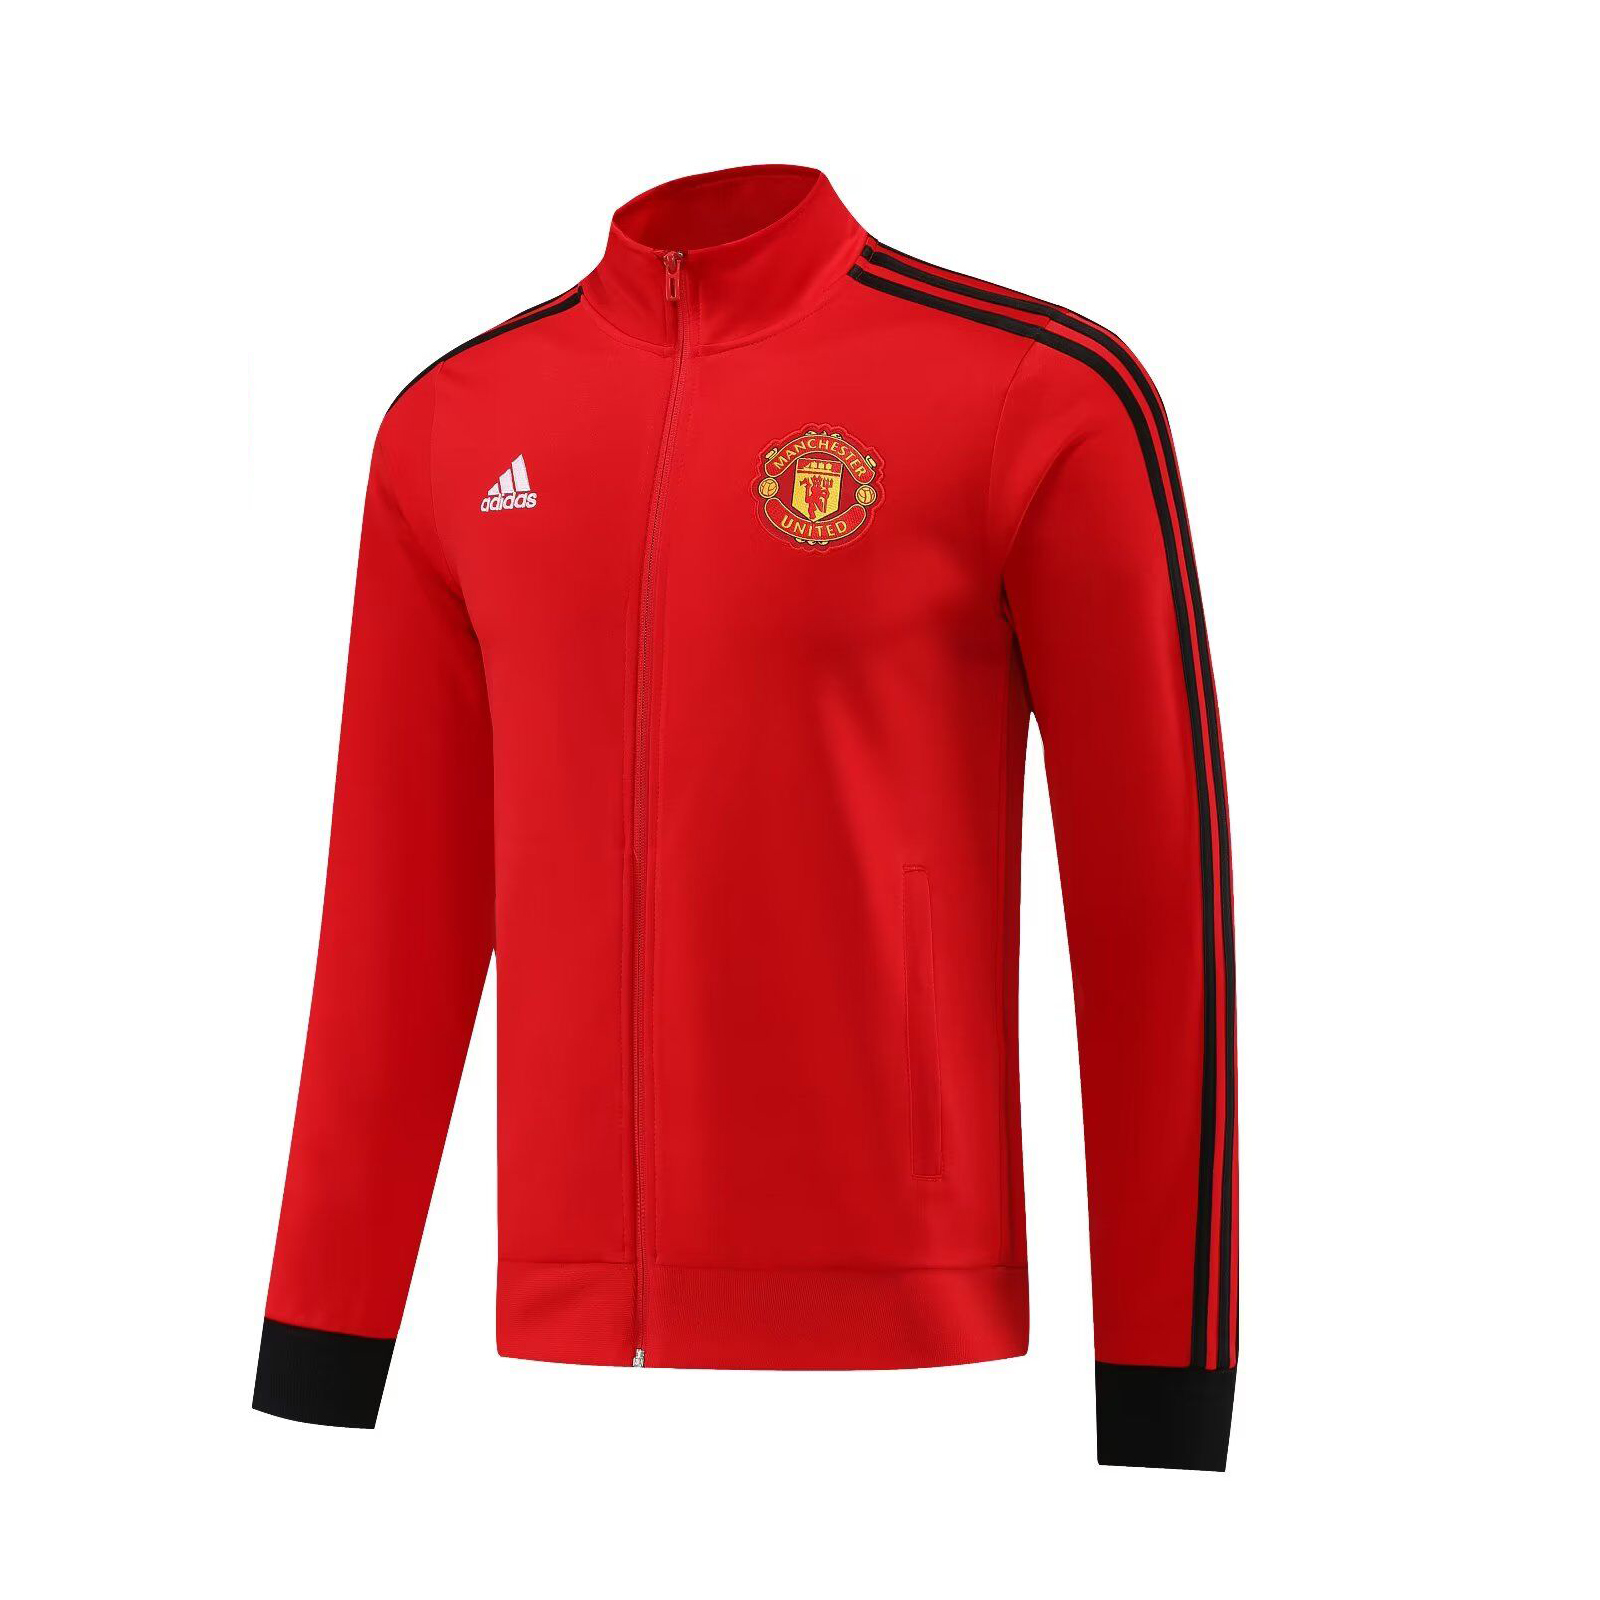 AAA Quality Manchester Utd 23/24 Jacket - Red/Black